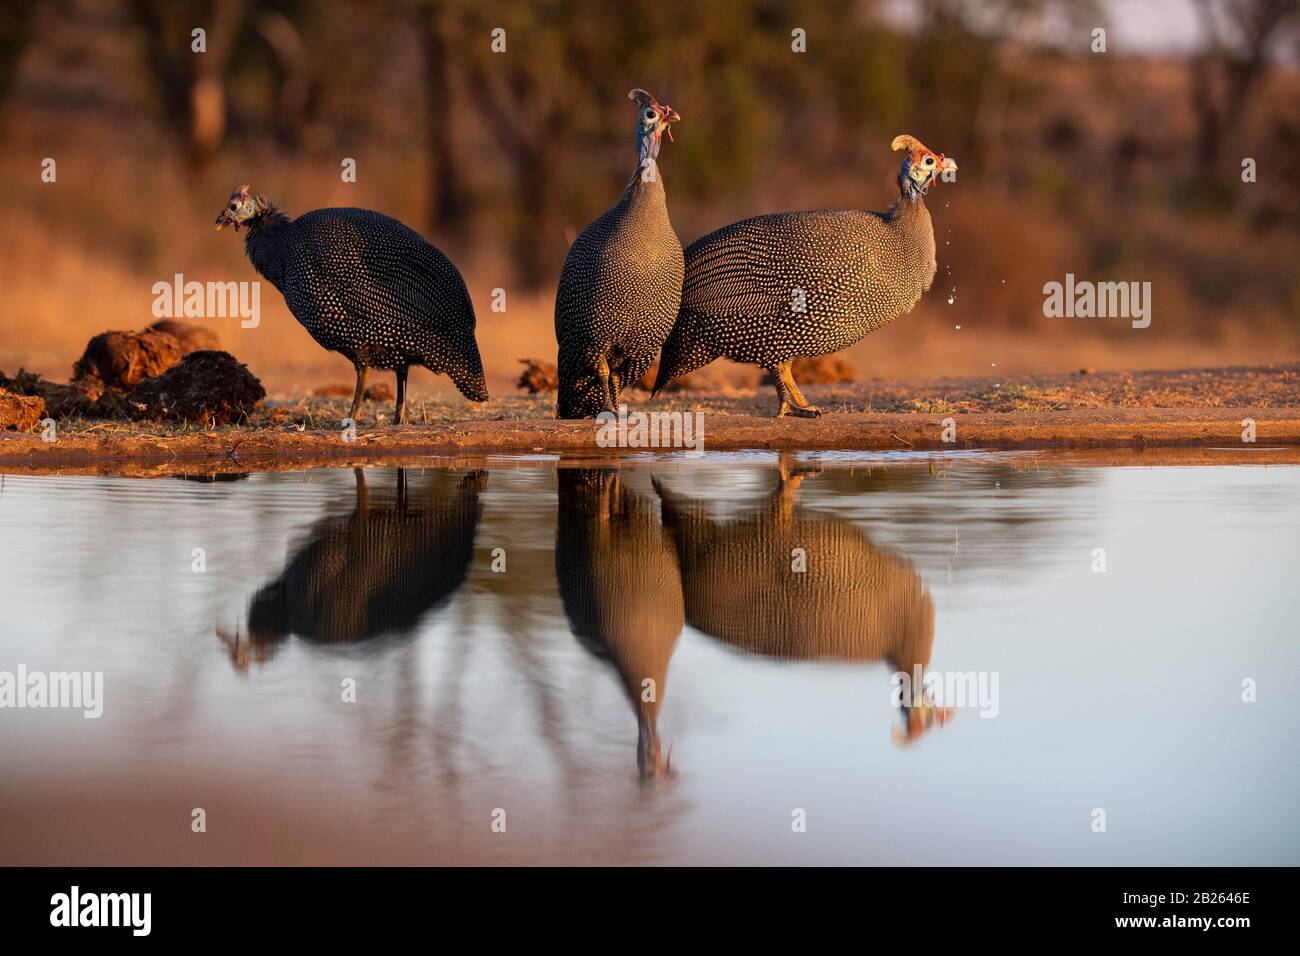 Helmeted guineafowl, Numida meleagris, Welgevonden Game Reserve, South Africa Stock Photo